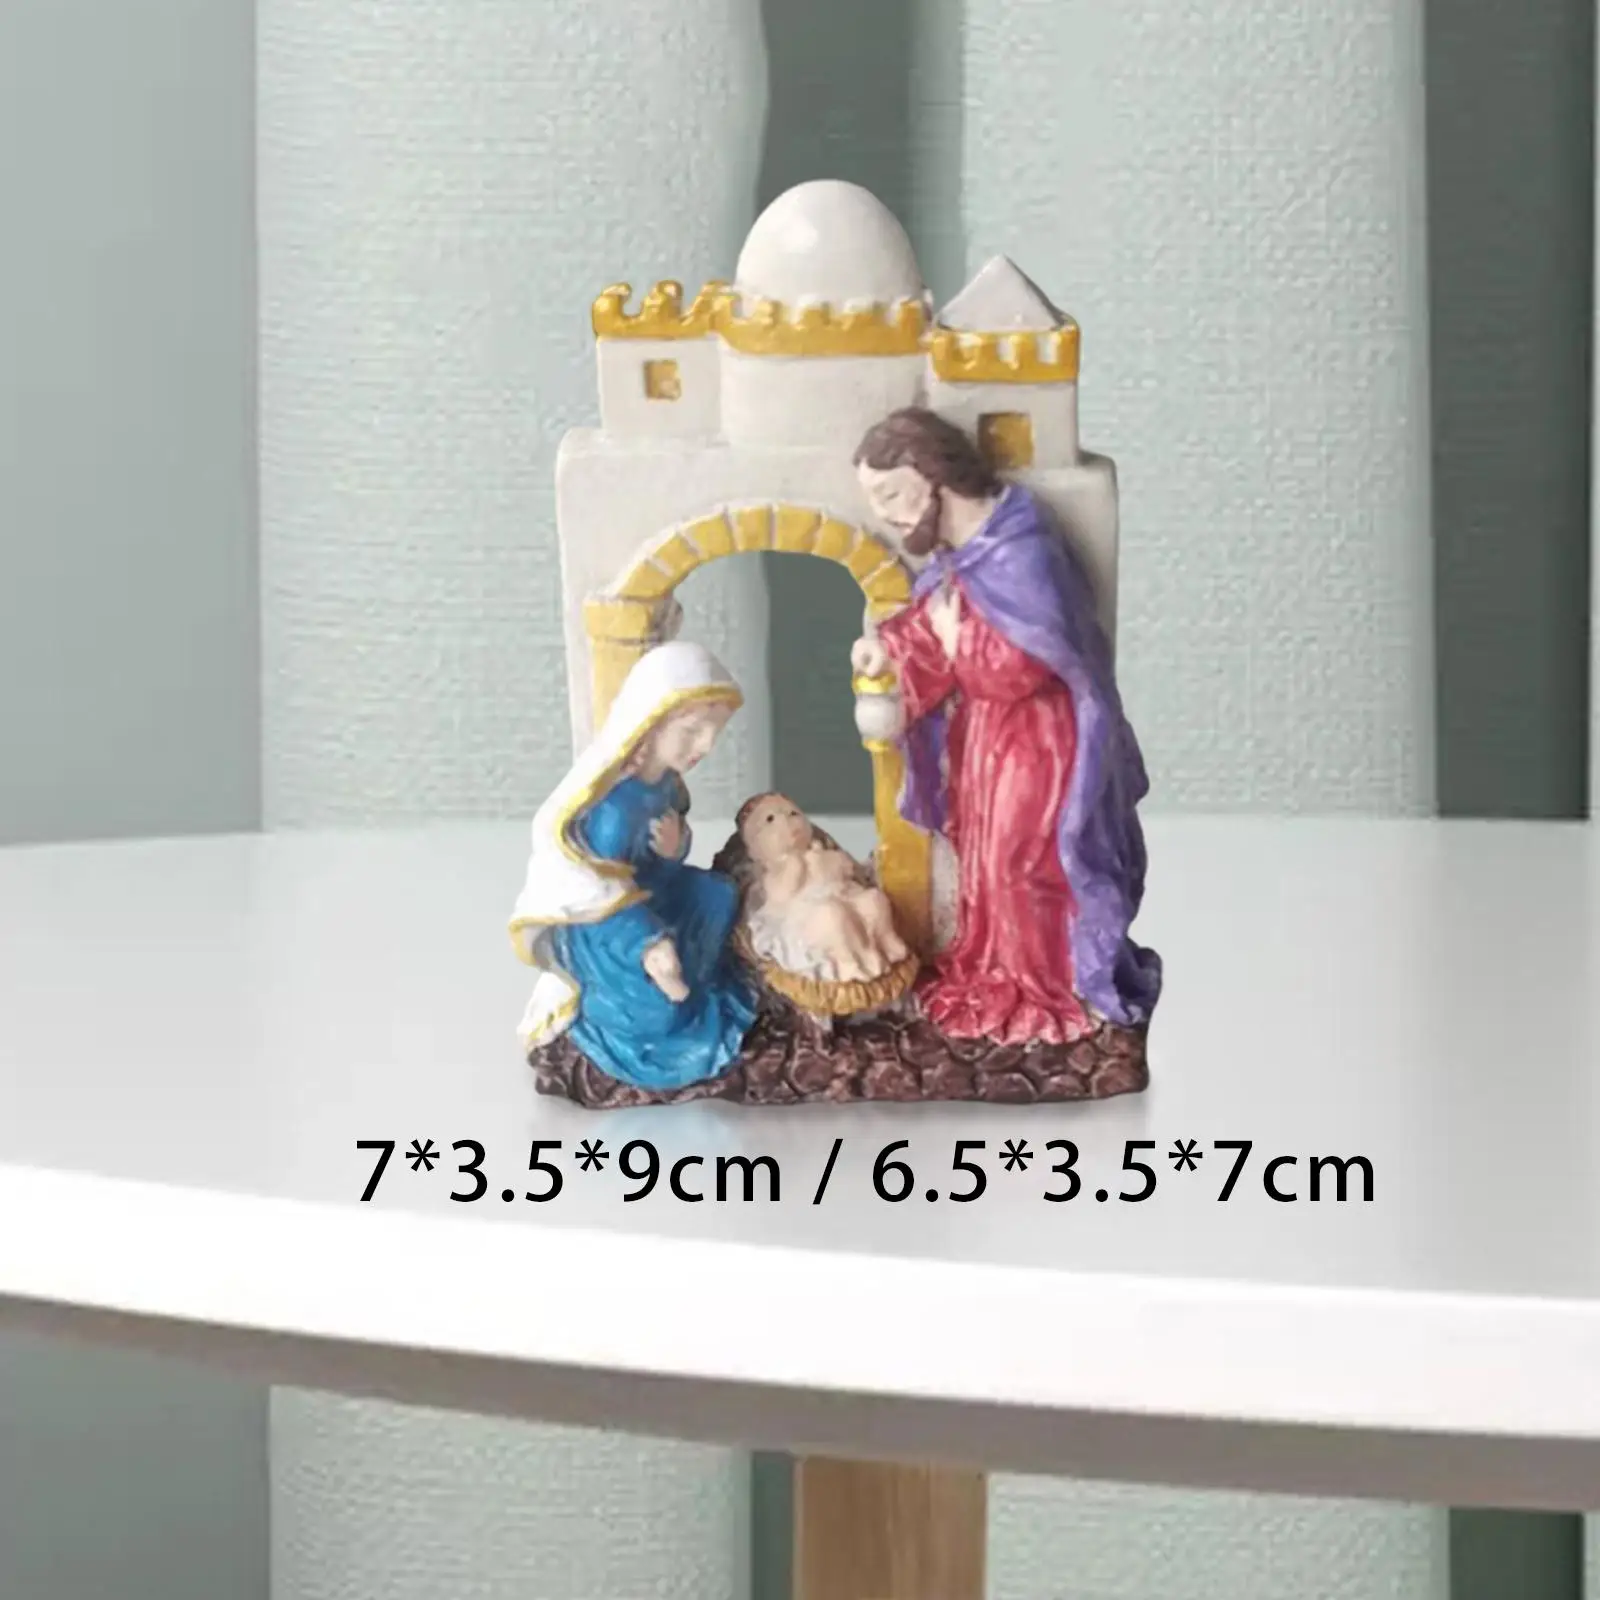 Resin Holy Family Figurine Home Deor Religious Nativity Scene Ornament for Church Holiday Wedding Memorial Holiday Gifts